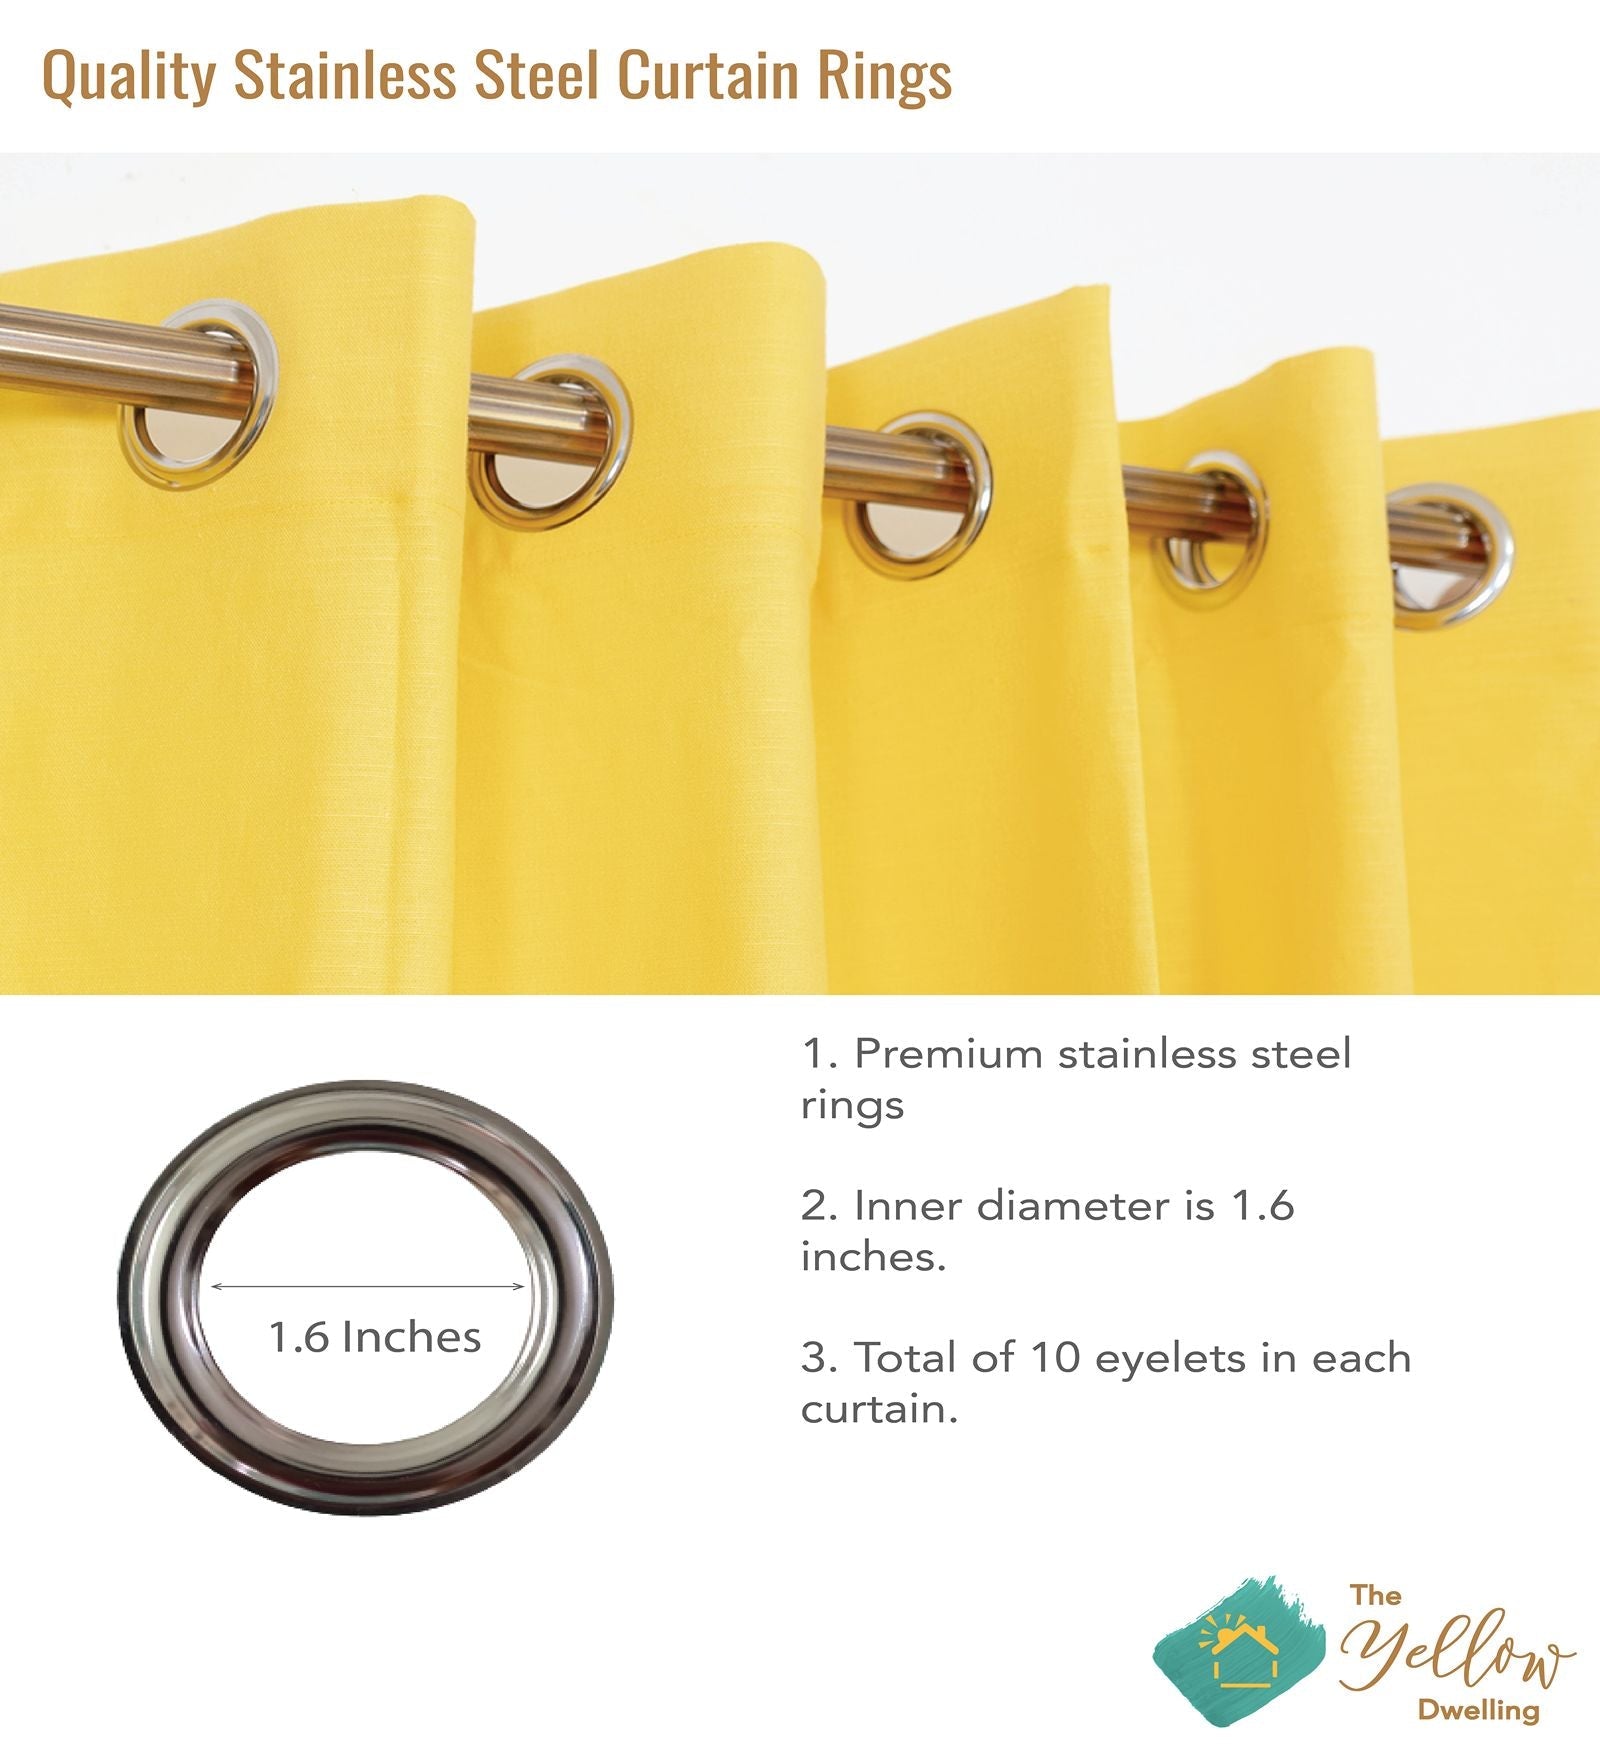 Solid Cotton Curtain - Sage Green